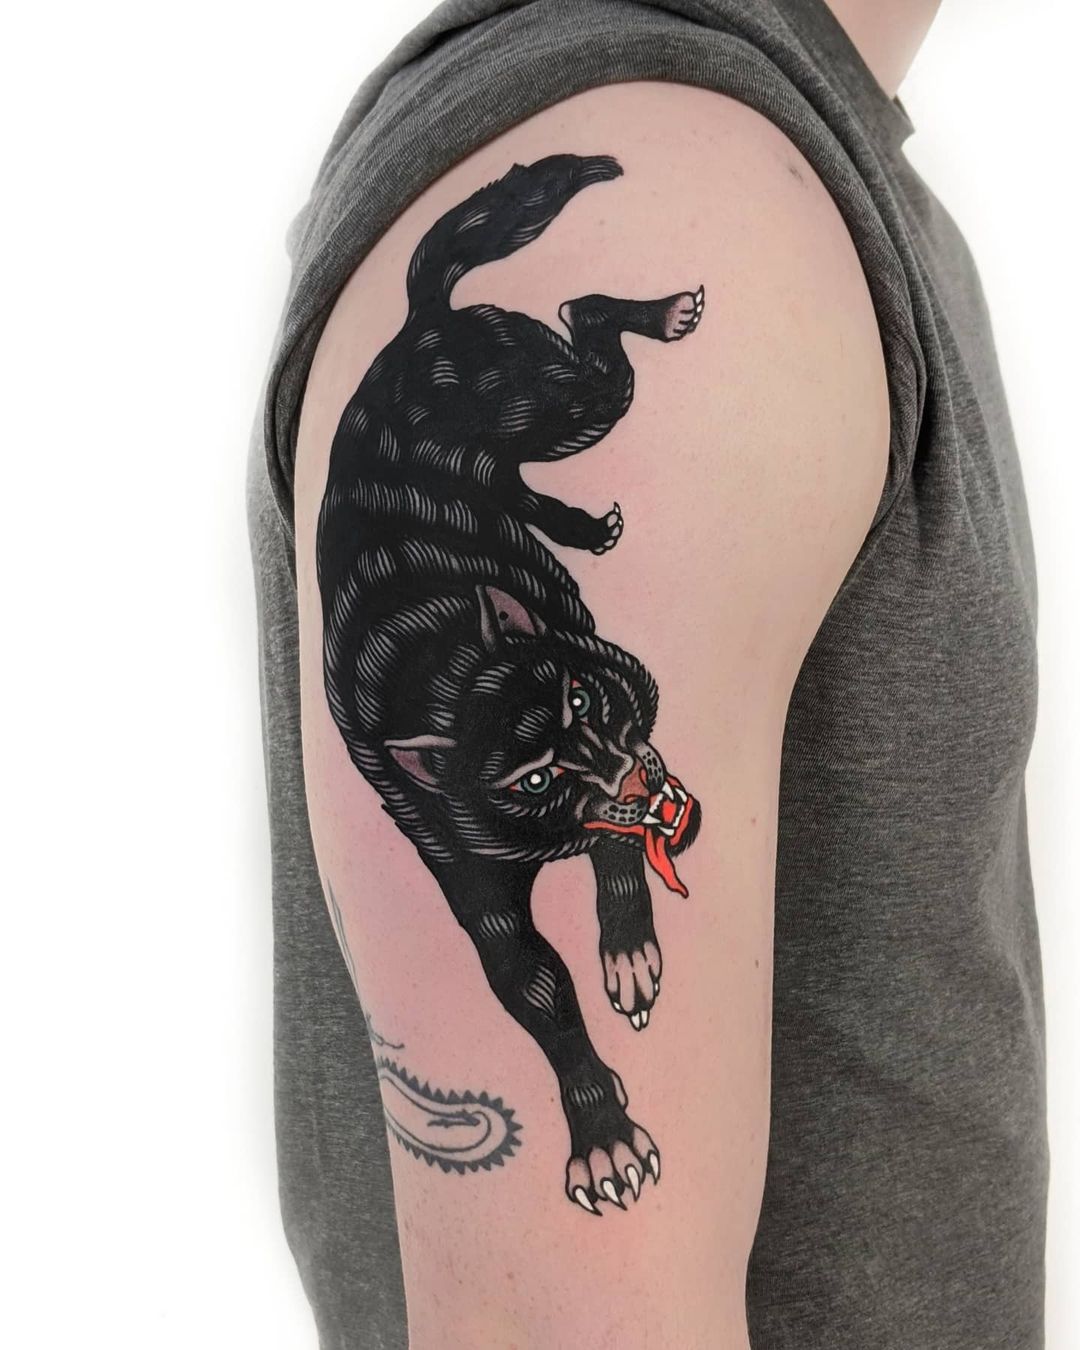 Nordic Wolf Tattoo Sleeve Black Image With A Pop Of Color